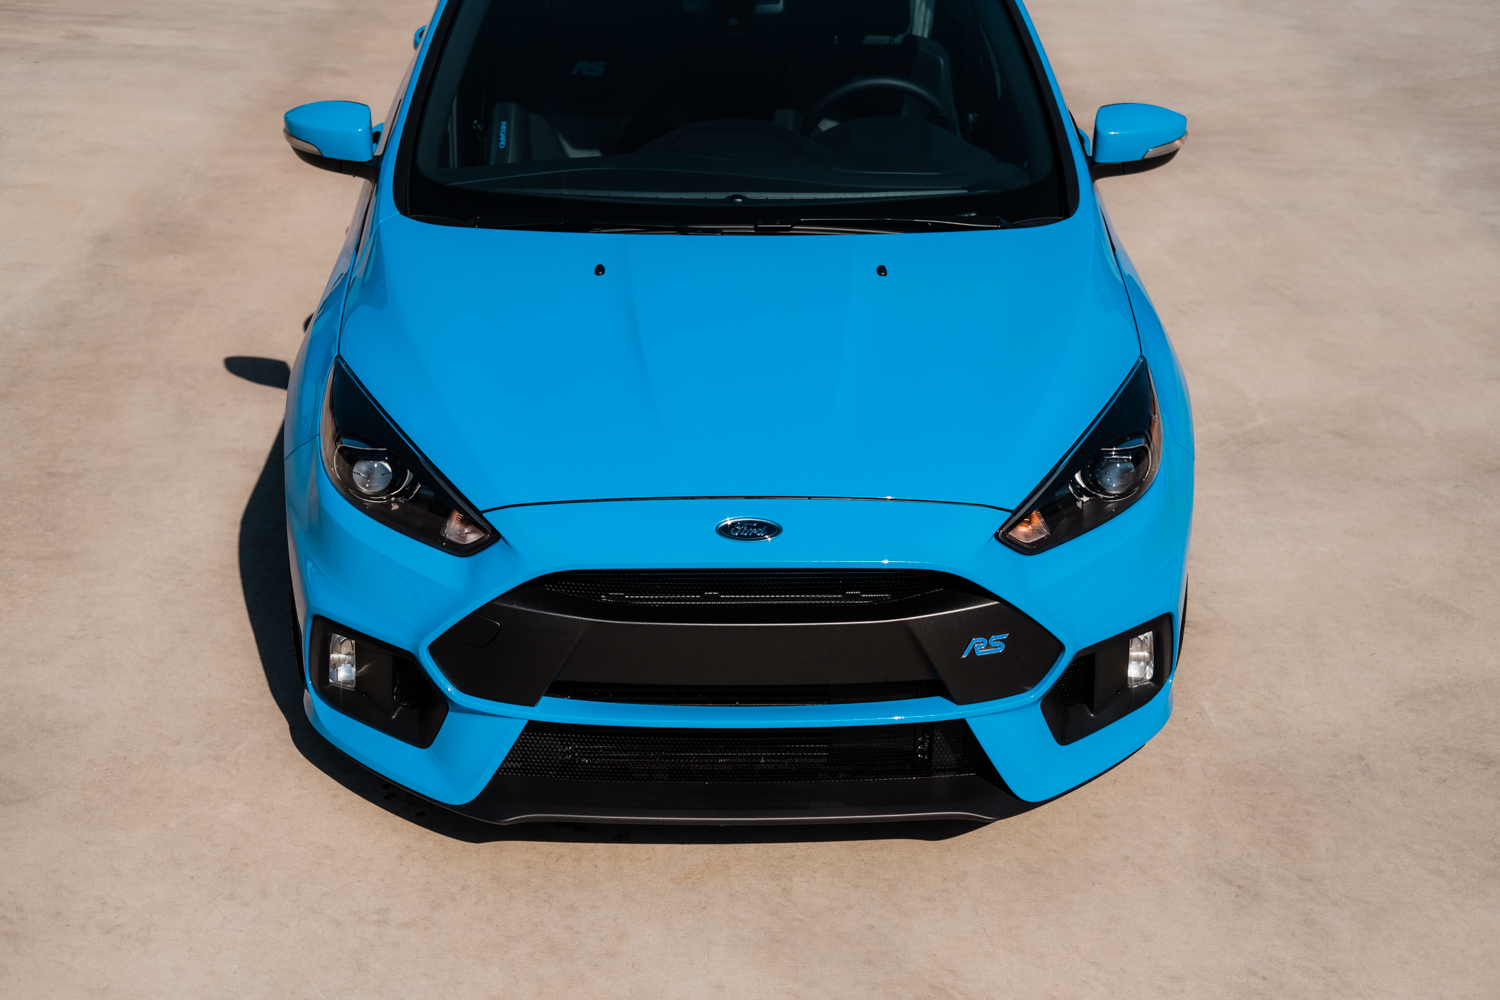 Ford Focus RS-XPEL Ultimate Paint Protection Film-Car Wash-Car Detailing-Paint Protection Film-Clear Bra-Ford Performance-119.jpg